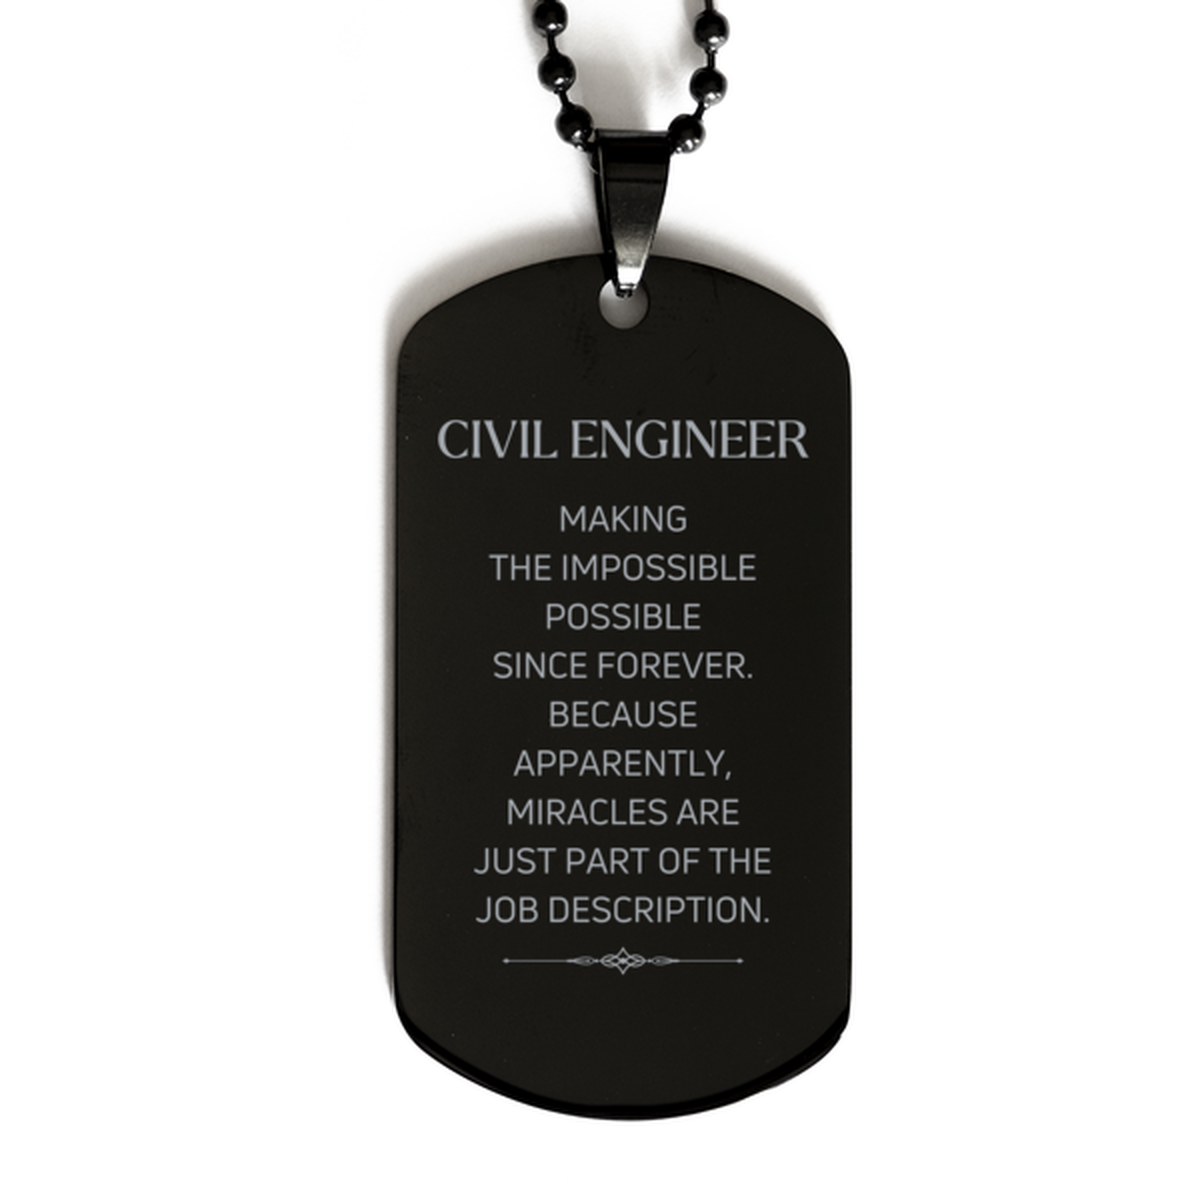 Funny Civil Engineer Gifts, Miracles are just part of the job description, Inspirational Birthday Black Dog Tag For Civil Engineer, Men, Women, Coworkers, Friends, Boss